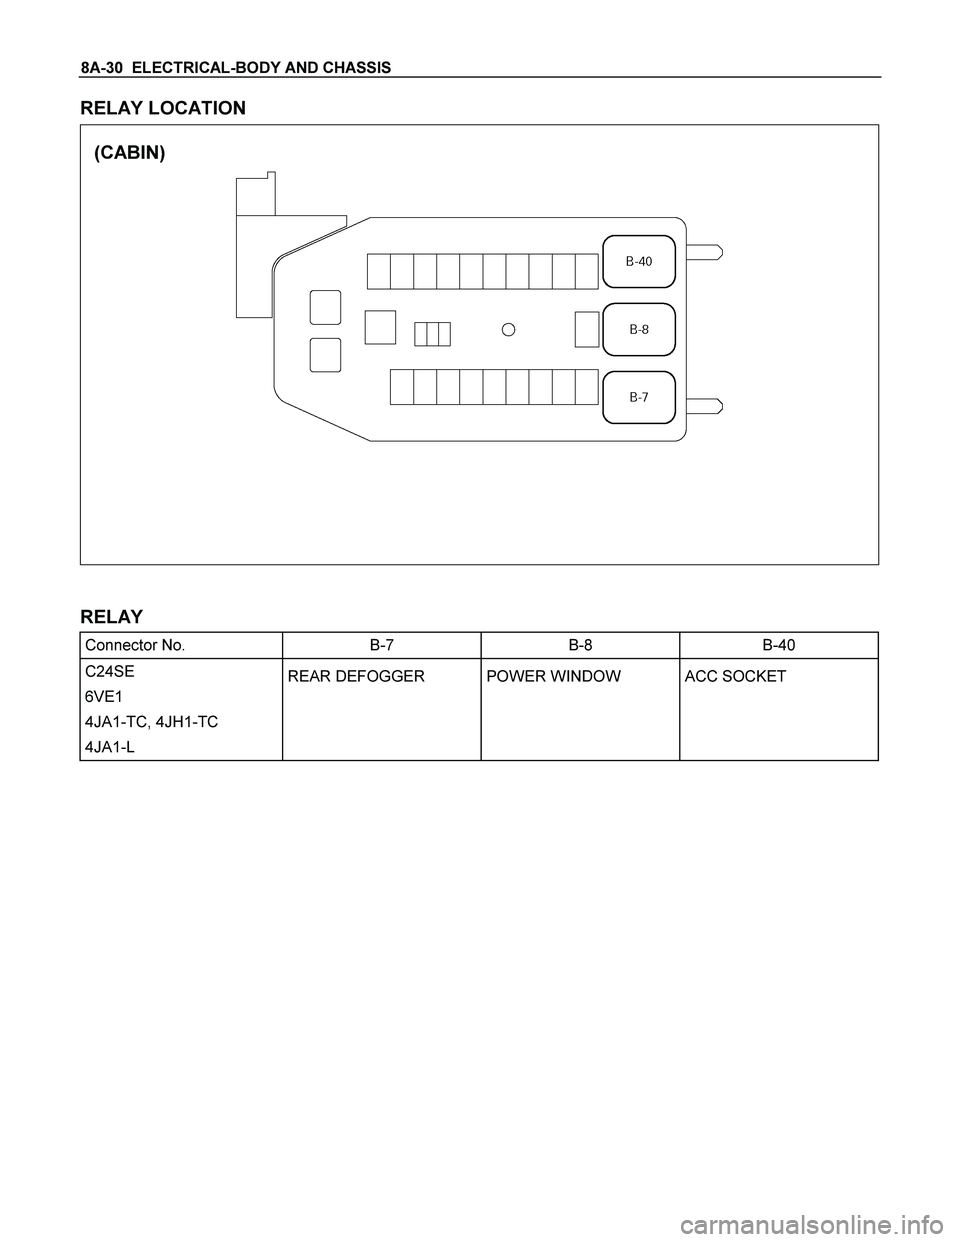 ISUZU TF SERIES 2004  Workshop Manual 8A-30  ELECTRICAL-BODY AND CHASSIS 
RELAY LOCATION 
 
  
(CABIN) 
 
 
 
 
 
RELAY 
Connector No.  B-7  B-8  B-40 
C24SE  
6VE1 
4JA1-TC, 4JH1-TC 
4JA1-L REAR DEFOGGER 
 POWER WINDOW  ACC SOCKET 
  